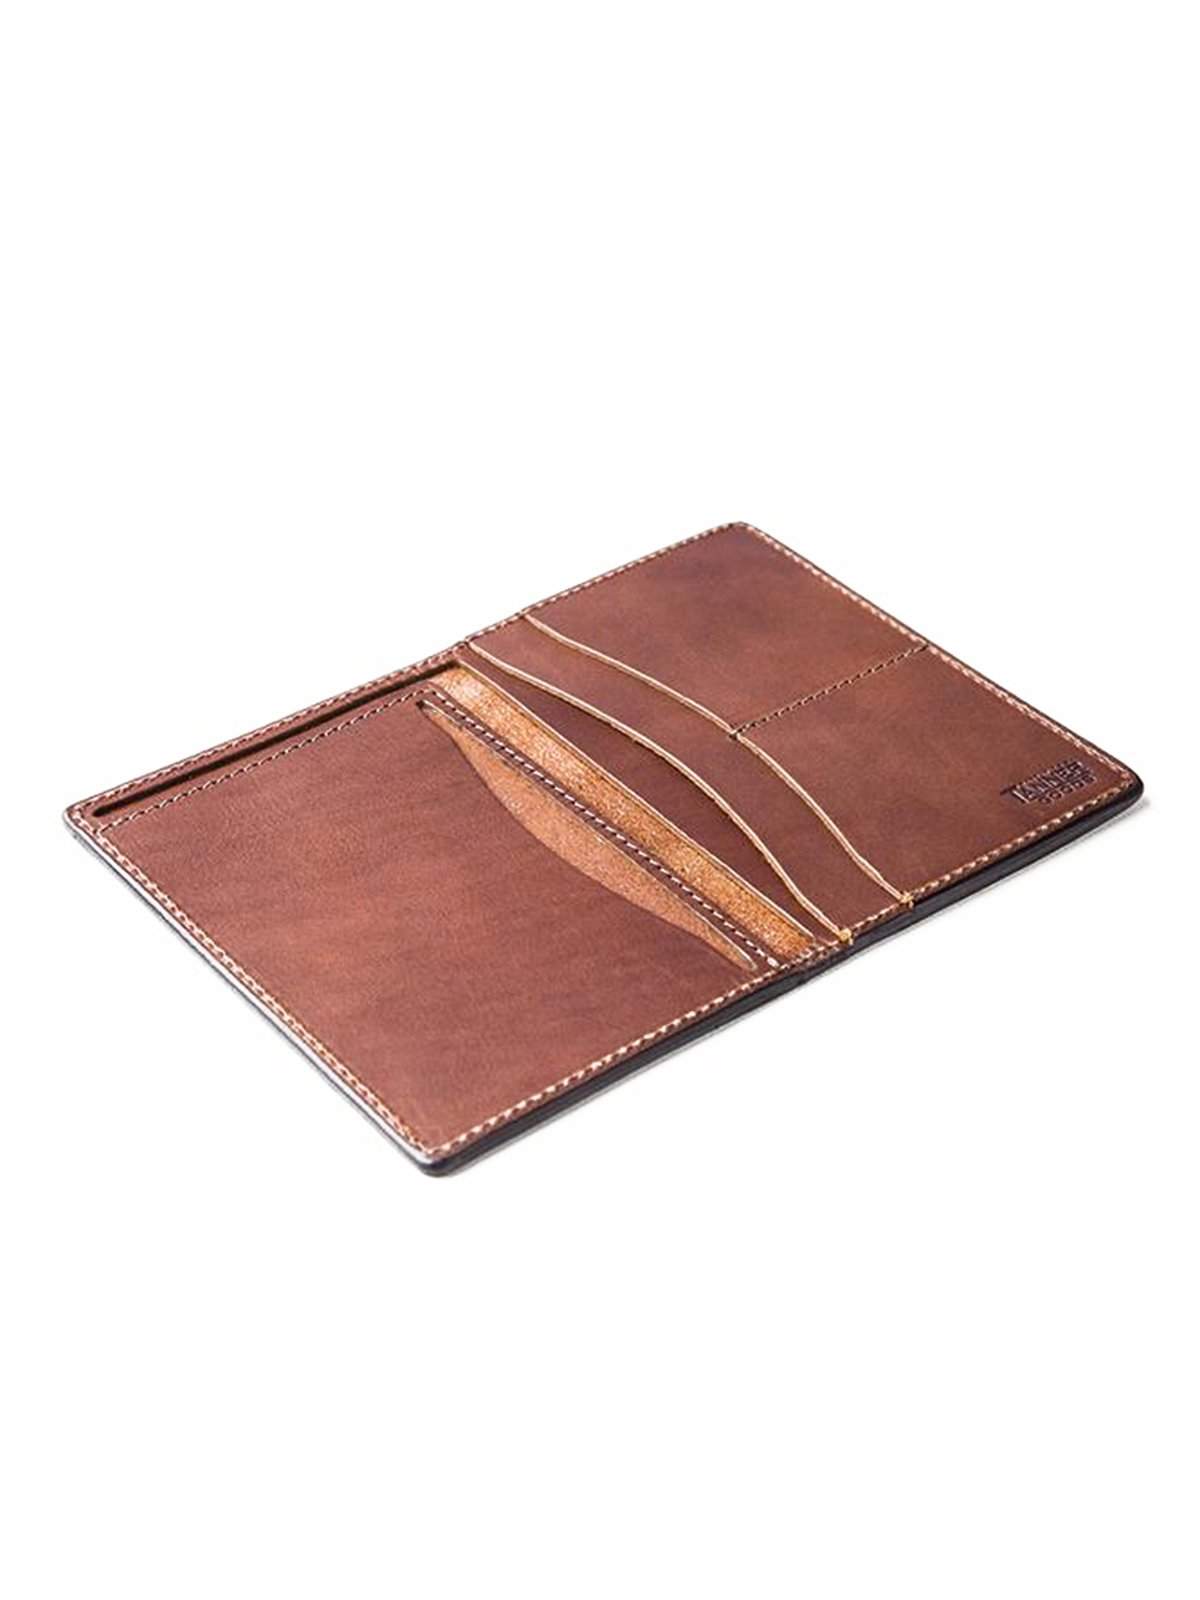 Tanner Goods Travel Wallet Cognac - MORE by Morello Indonesia